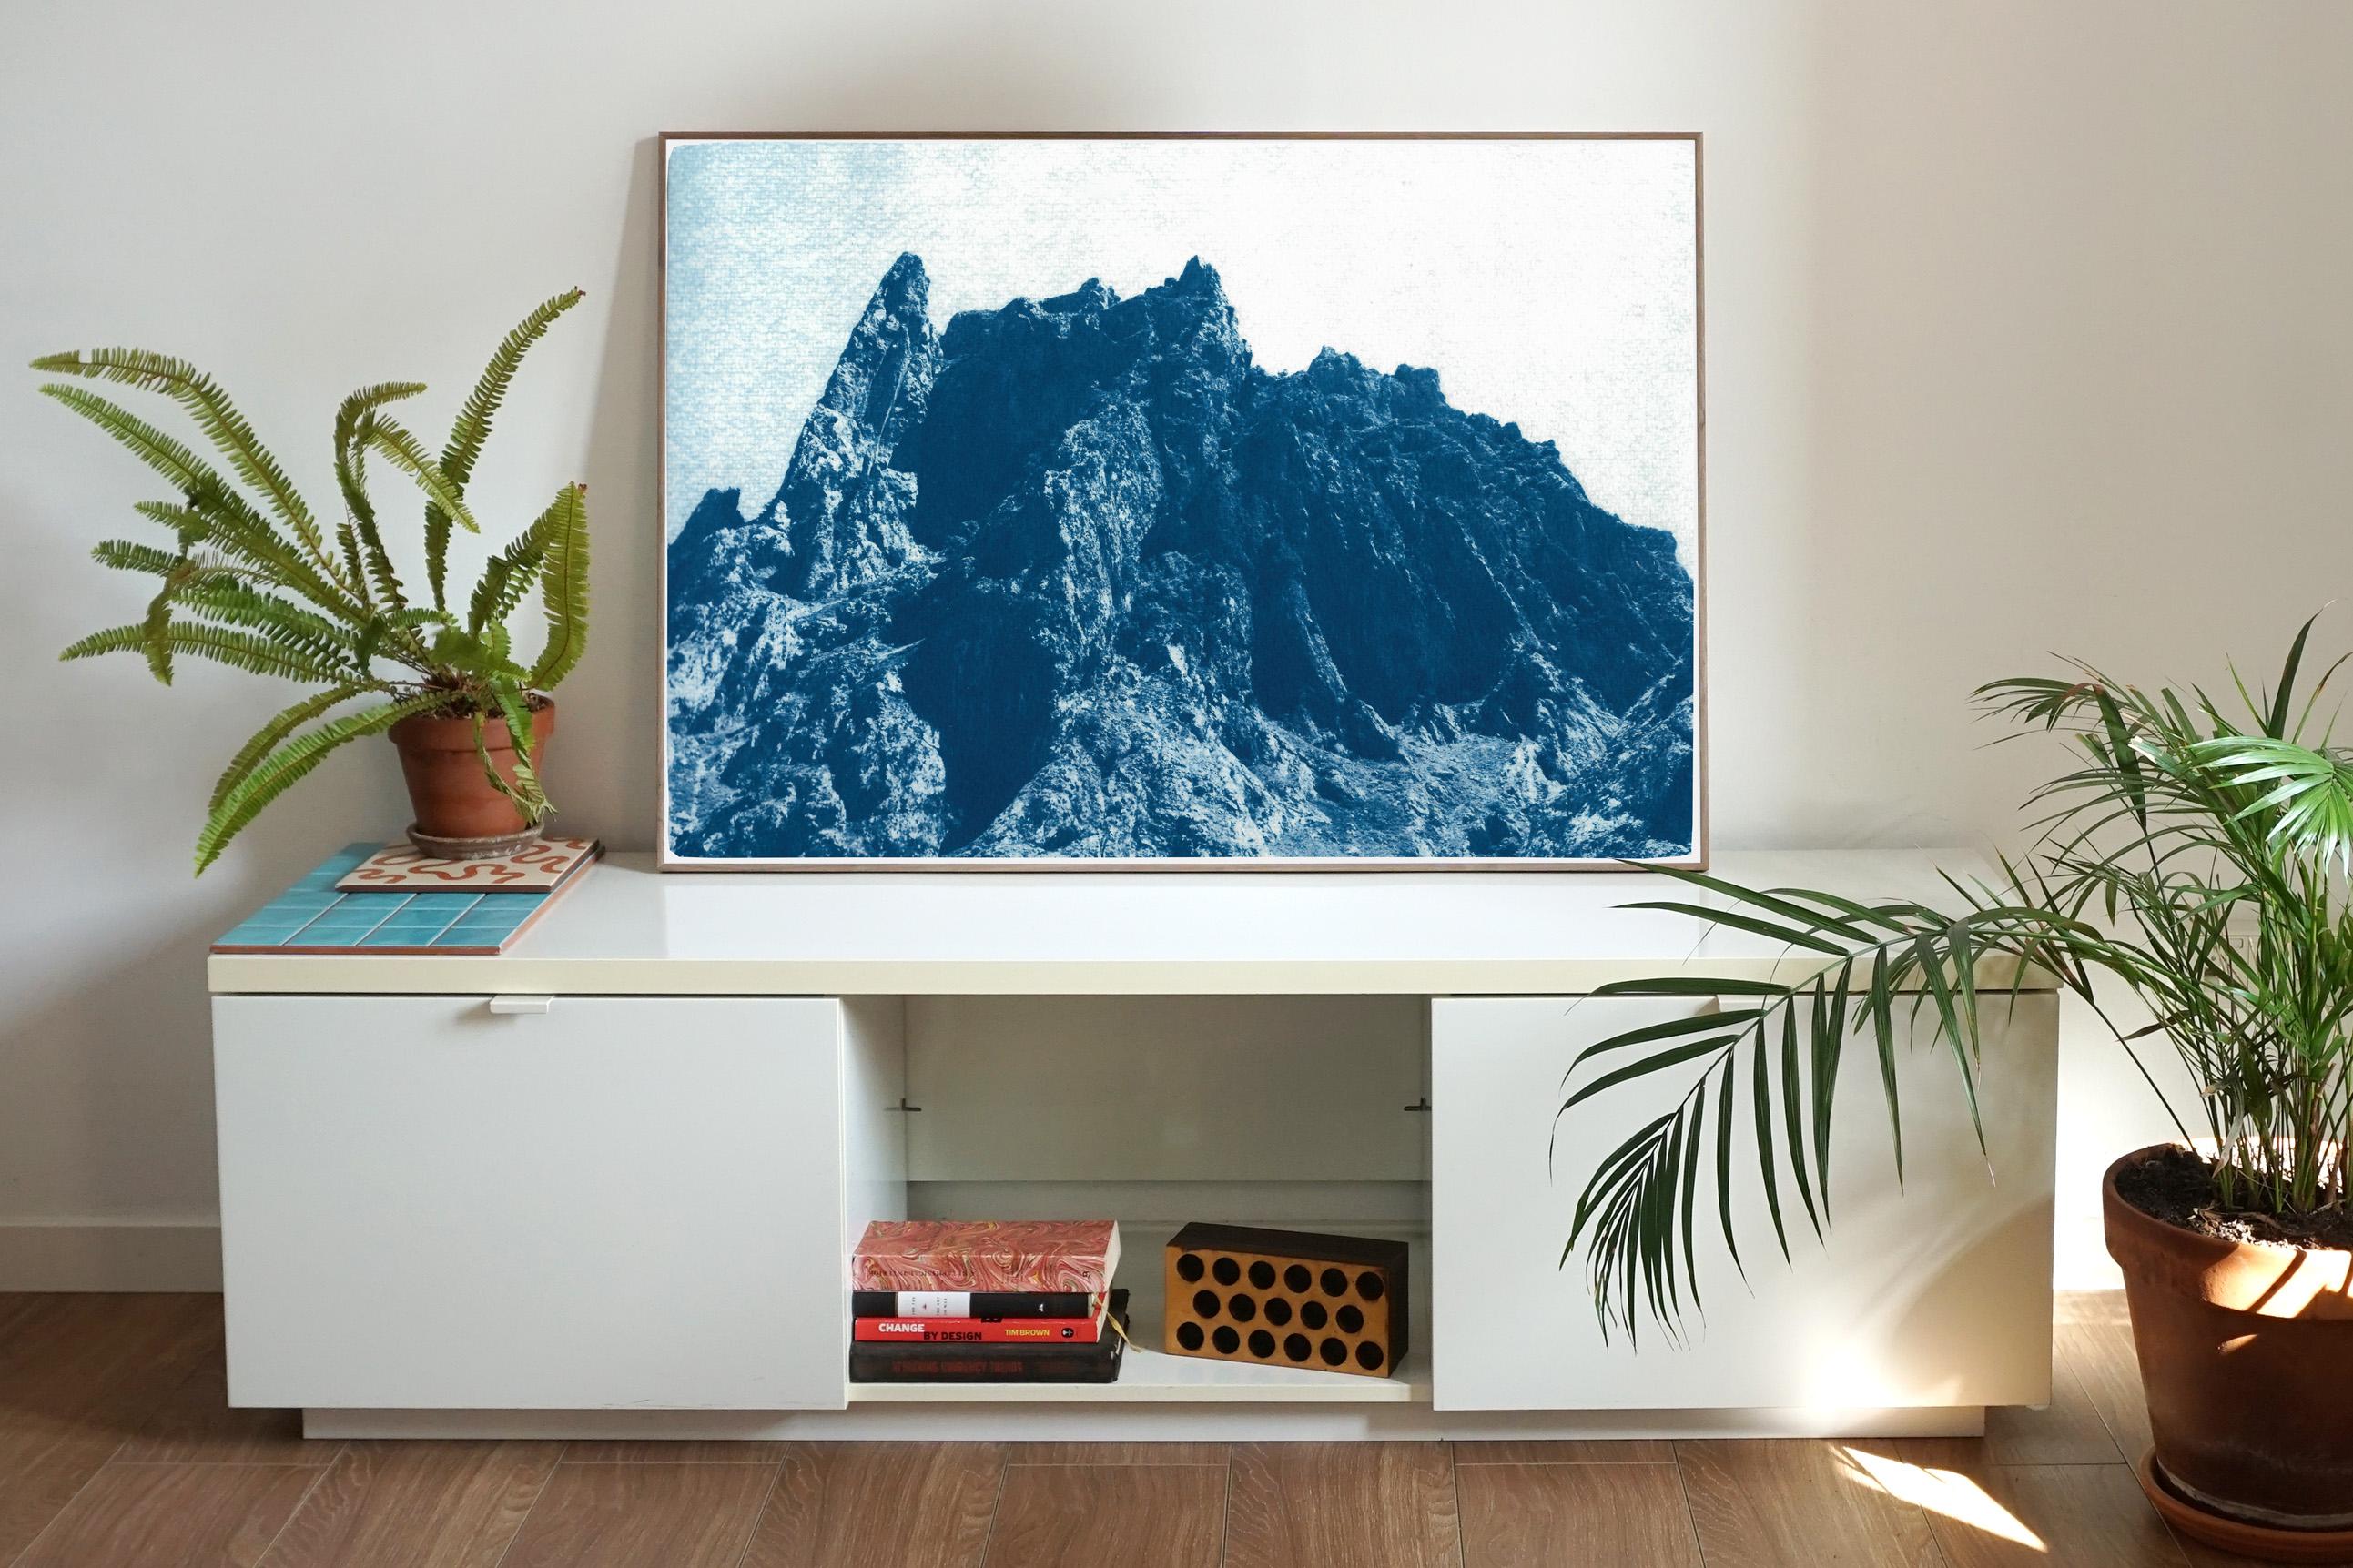 This is an exclusive handprinted limited edition cyanotype.
This cyanotype shows hilly desert mountain of the Atlas in Morocco. 

Details:
+ Title: Rocky Desert Mountain 
+ Year: 2020
+ Edition Size: 100
+ Stamped and Certificate of Authenticity